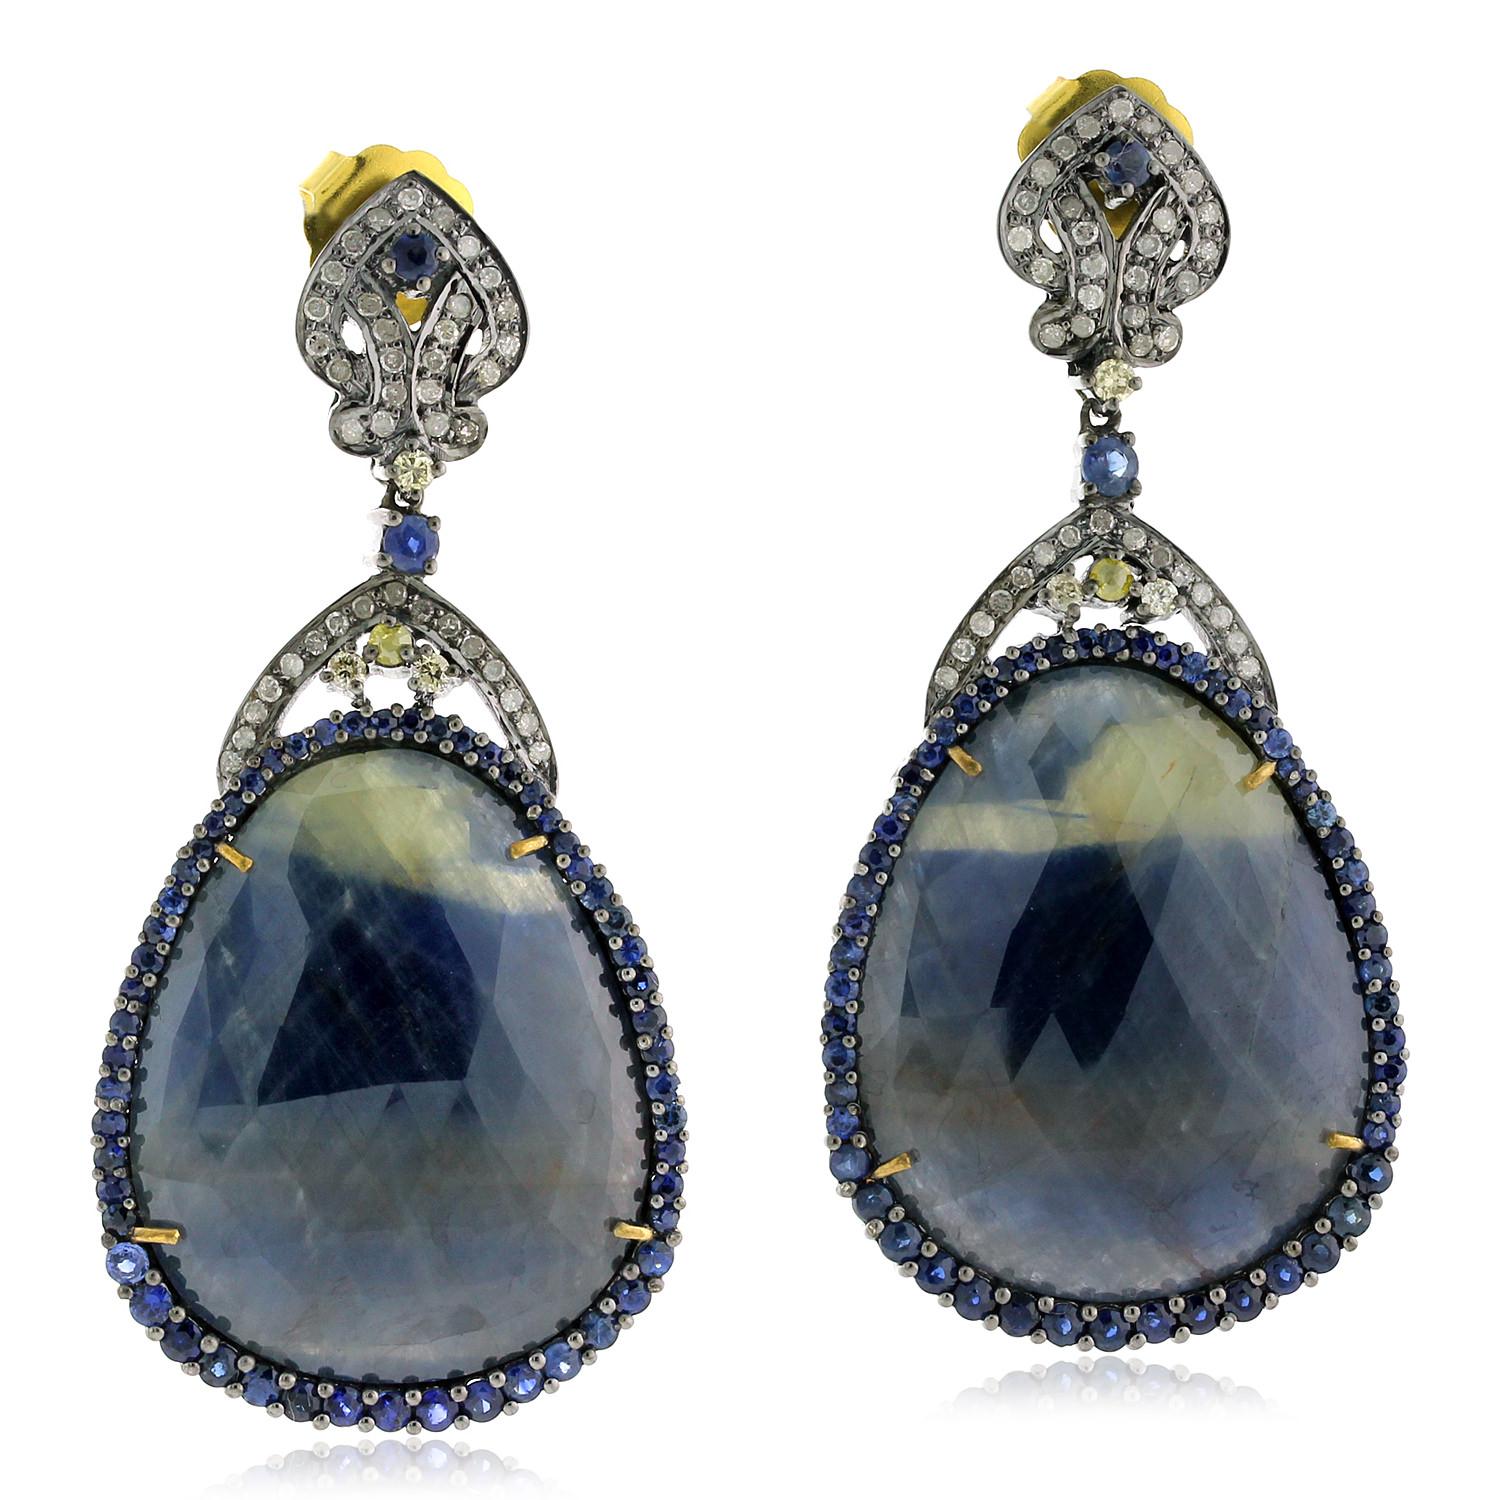 Pear Shaped Sapphire Earrings With Diamonds Made In 18k Gold & Silver  In New Condition For Sale In New York, NY